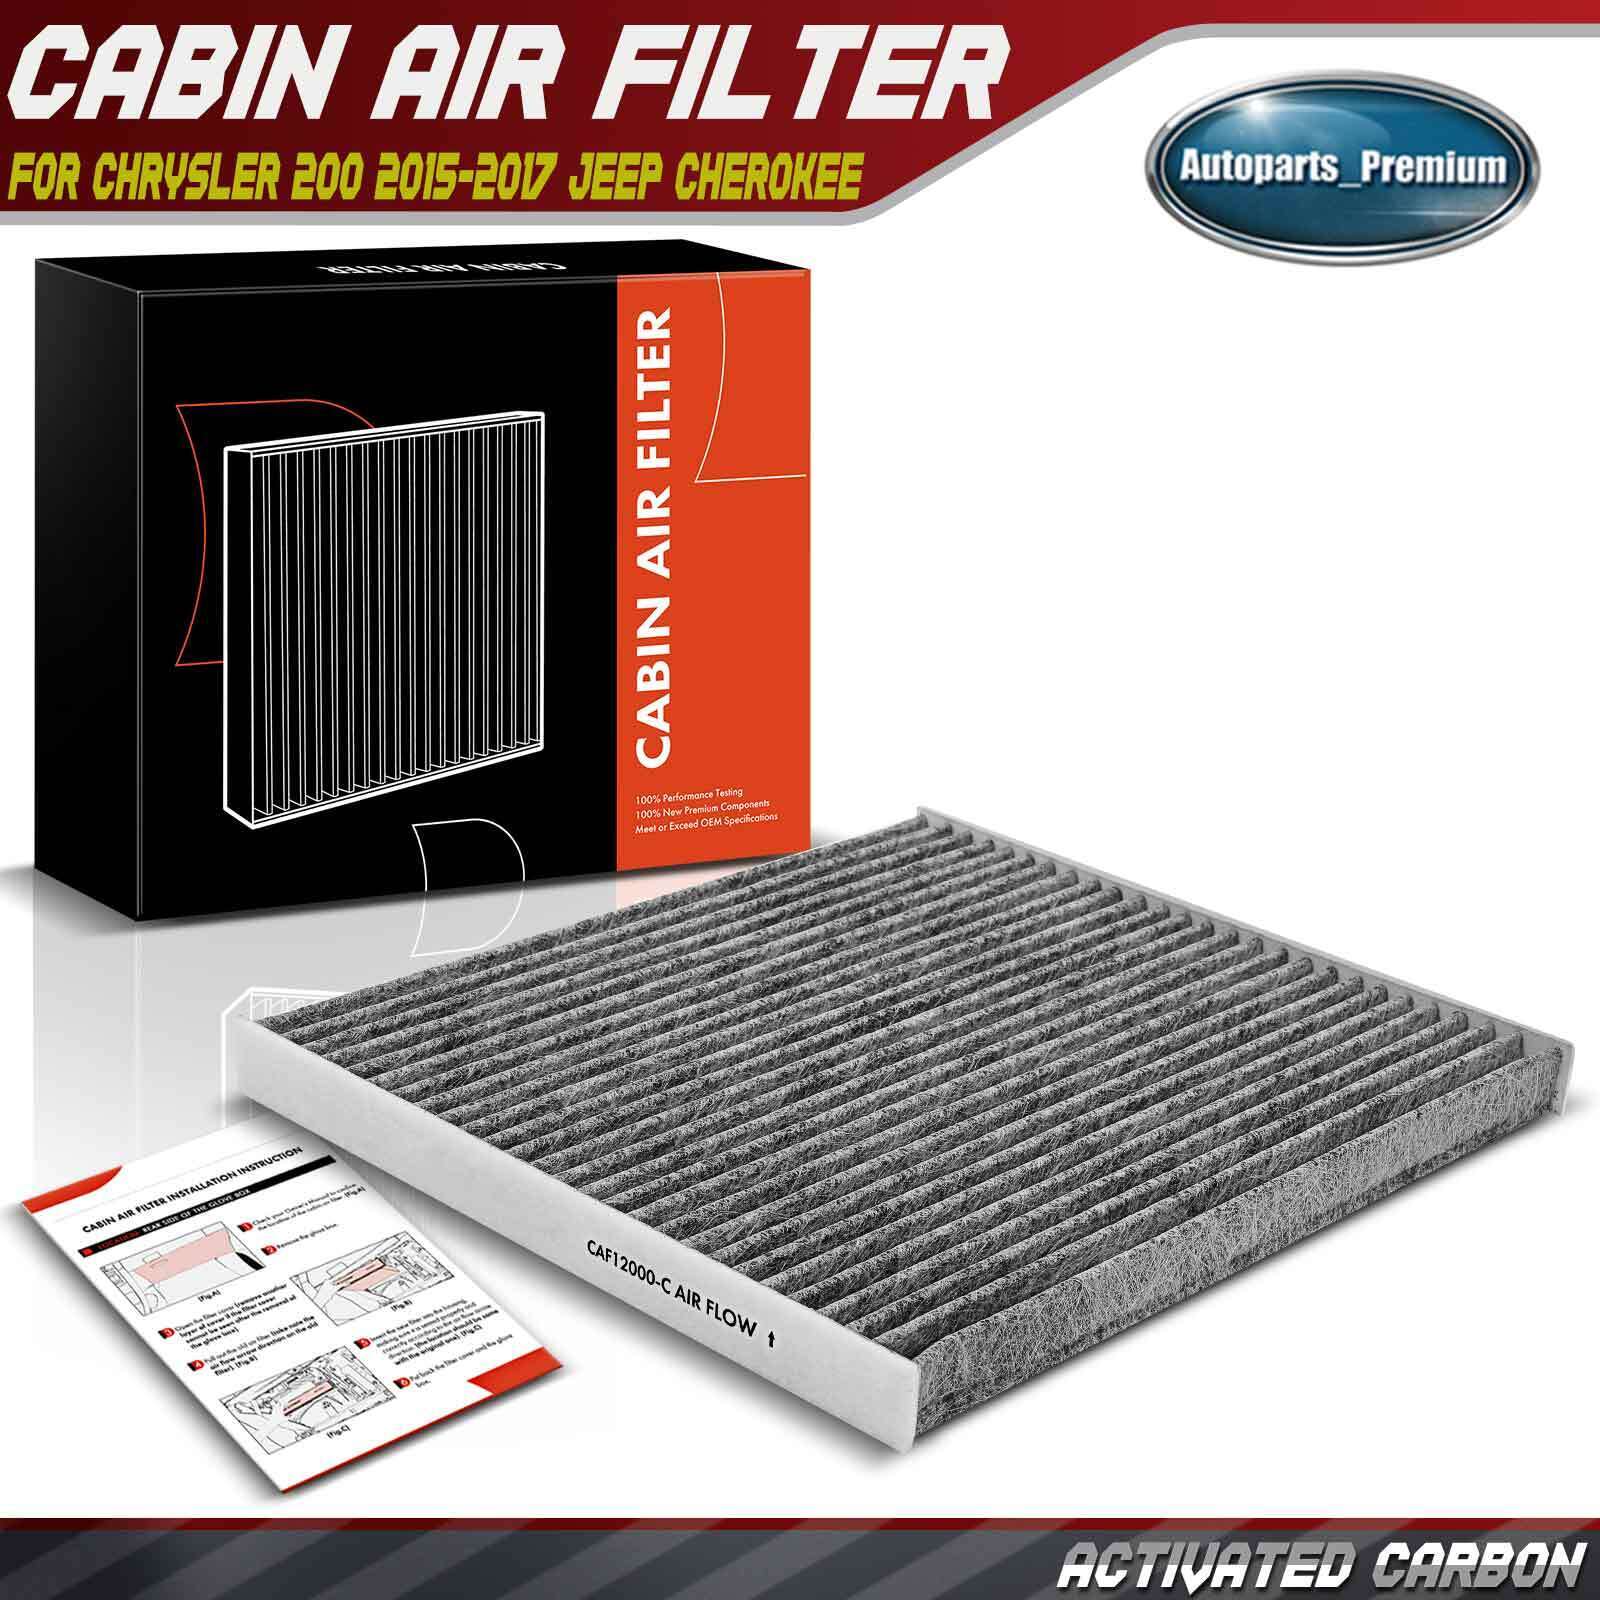 Activated Carbon Cabin Air Filter for Chrysler 200 2015-2017 Jeep Cherokee 14-18